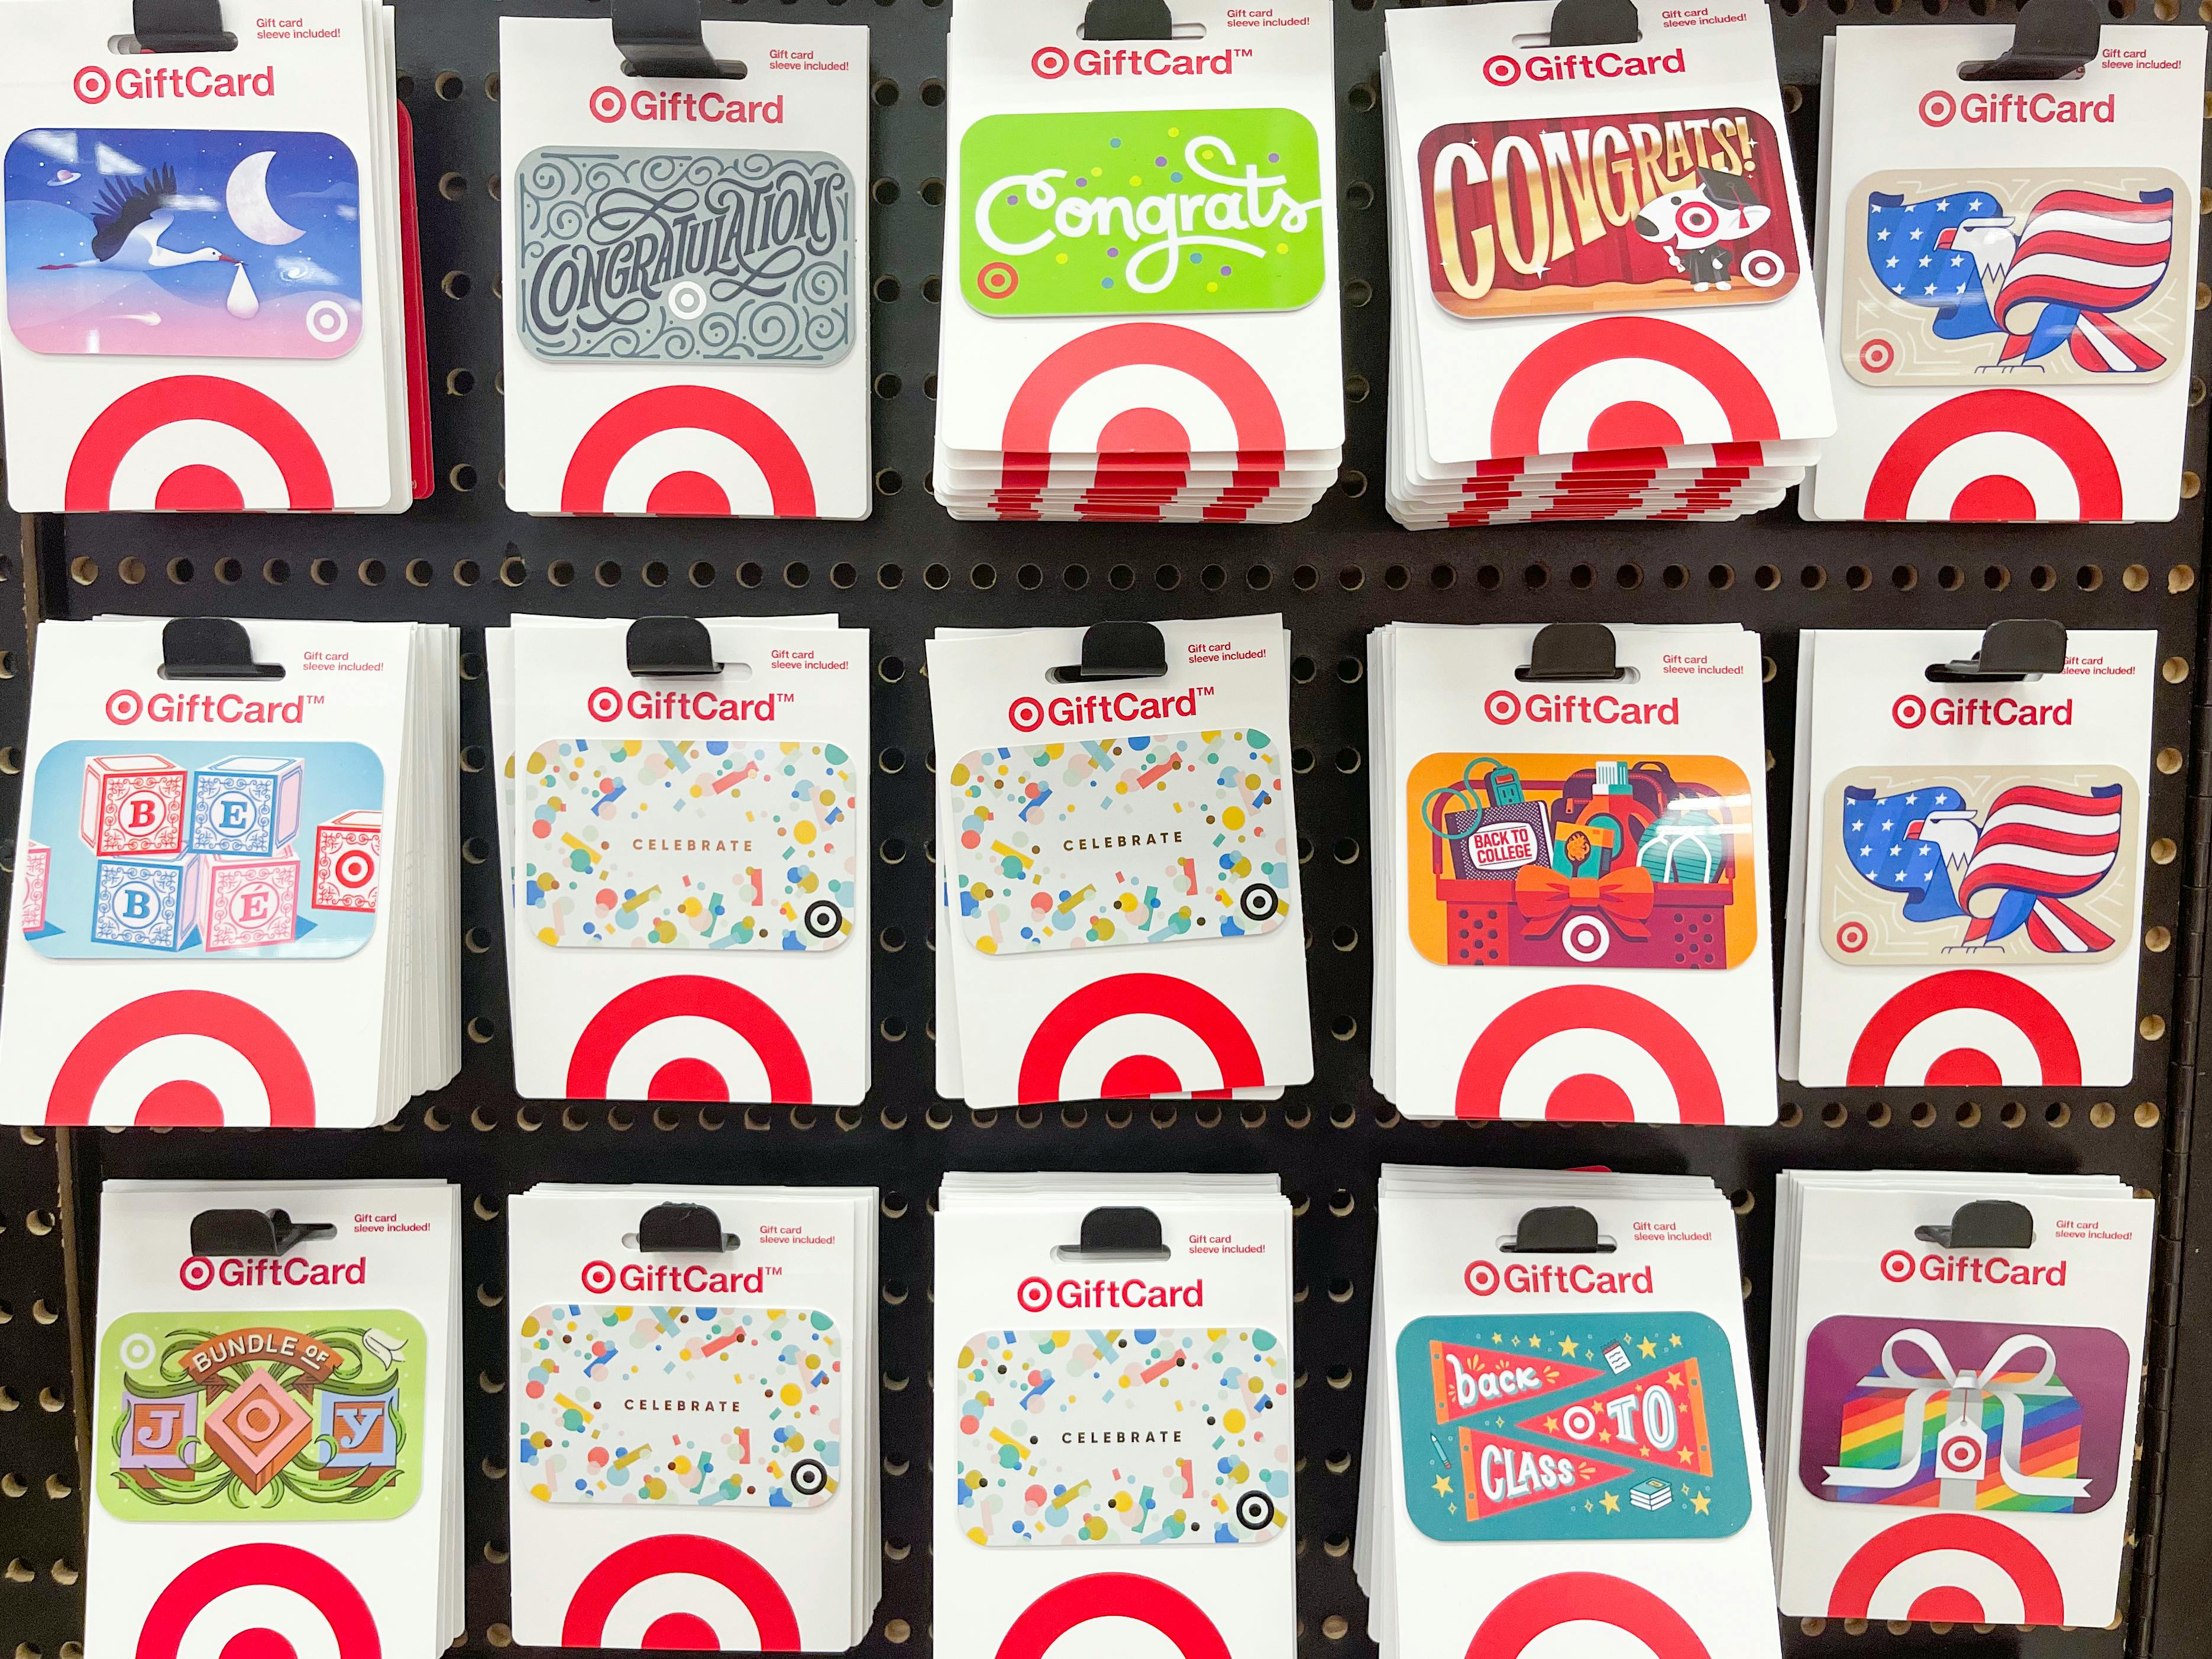 Target gift cards on a display wall inside Target